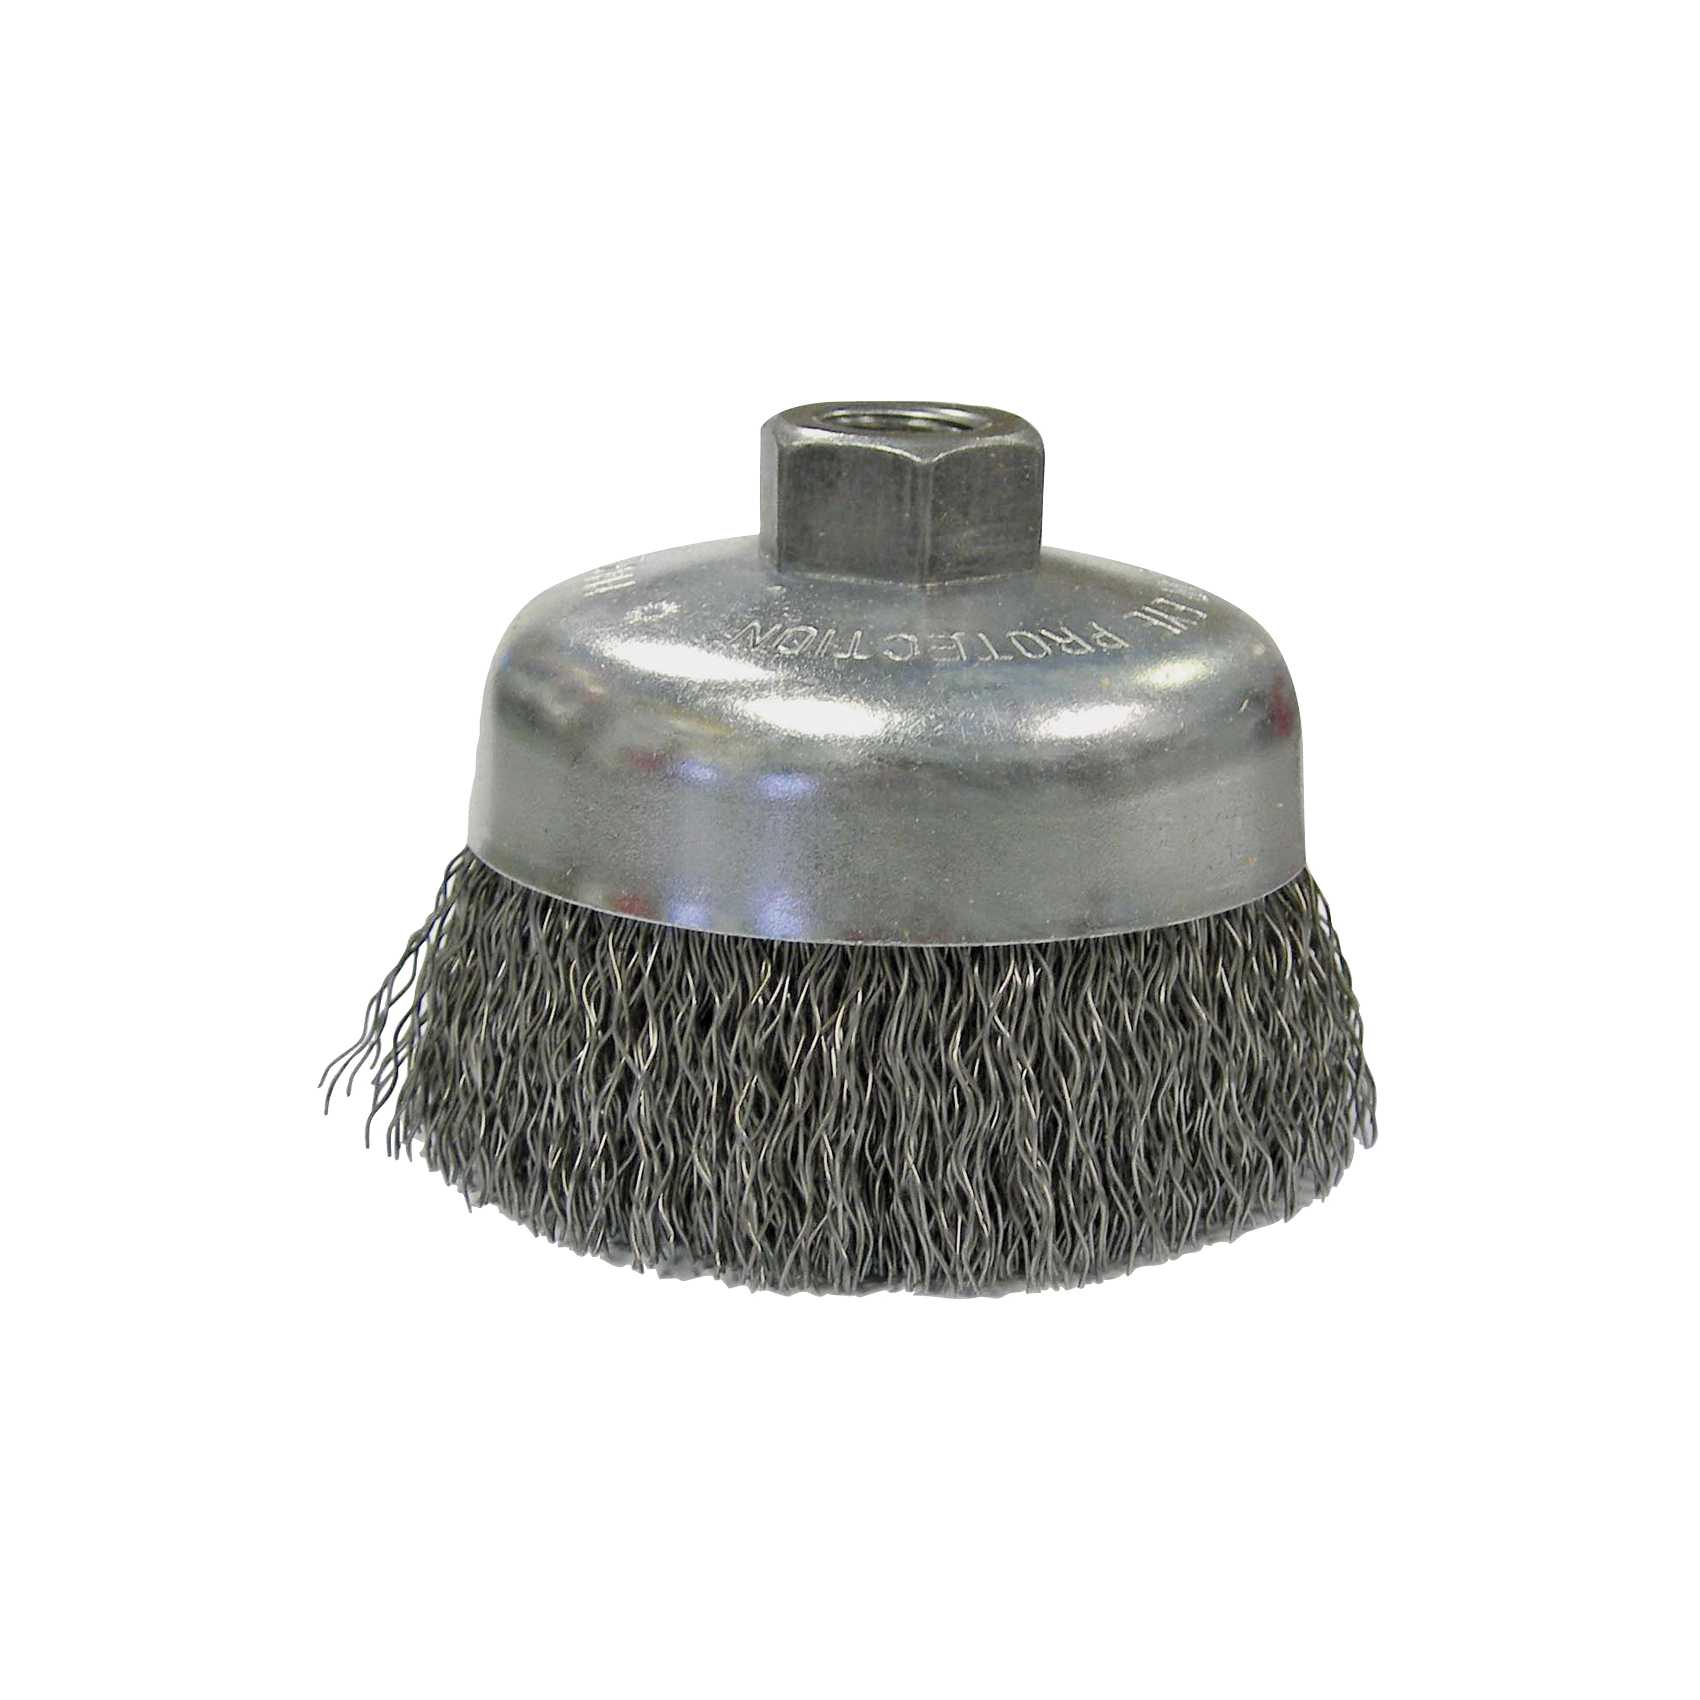 36037 Wire Cup Brush, 6 in Dia, 5/8-11 Arbor/Shank, Carbon Steel Bristle